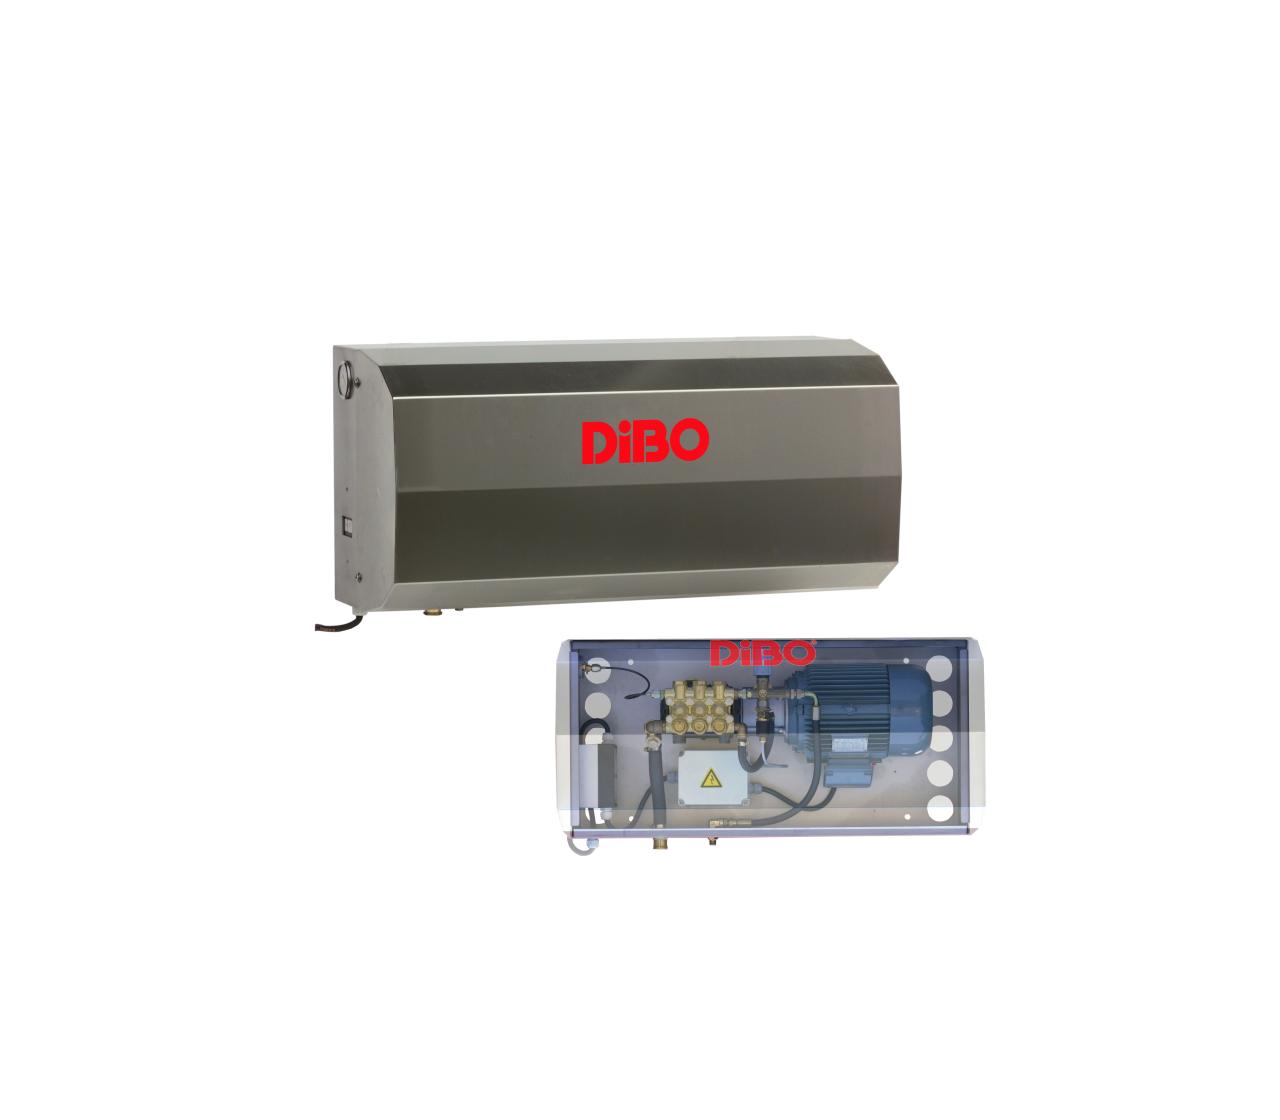 DiBO CPU-S industrial single-unit with stainless steel enclosure suitable for the food industry